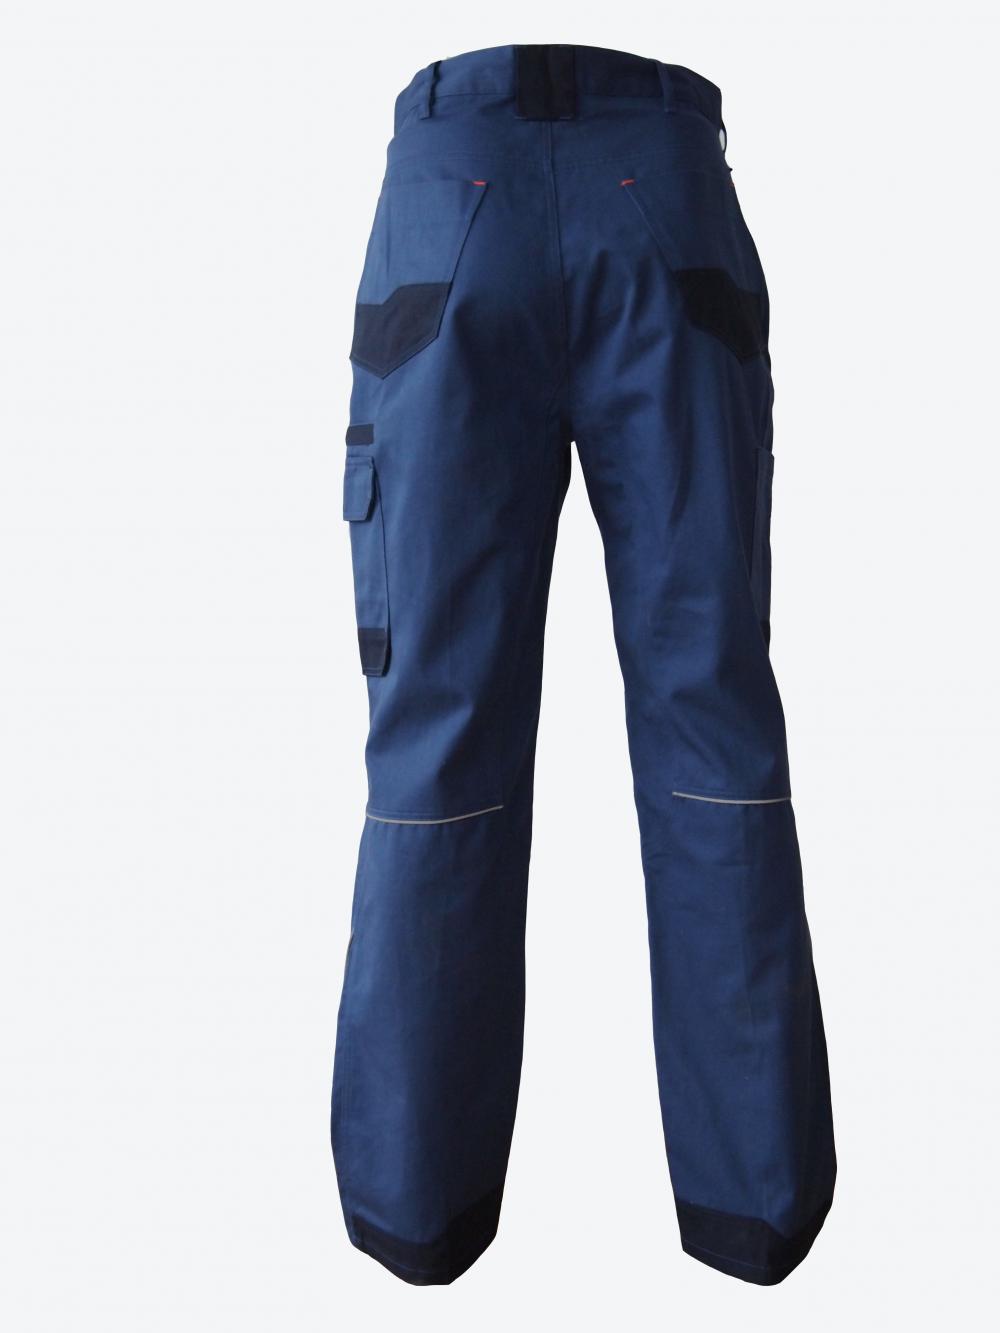 Construction Working Pants